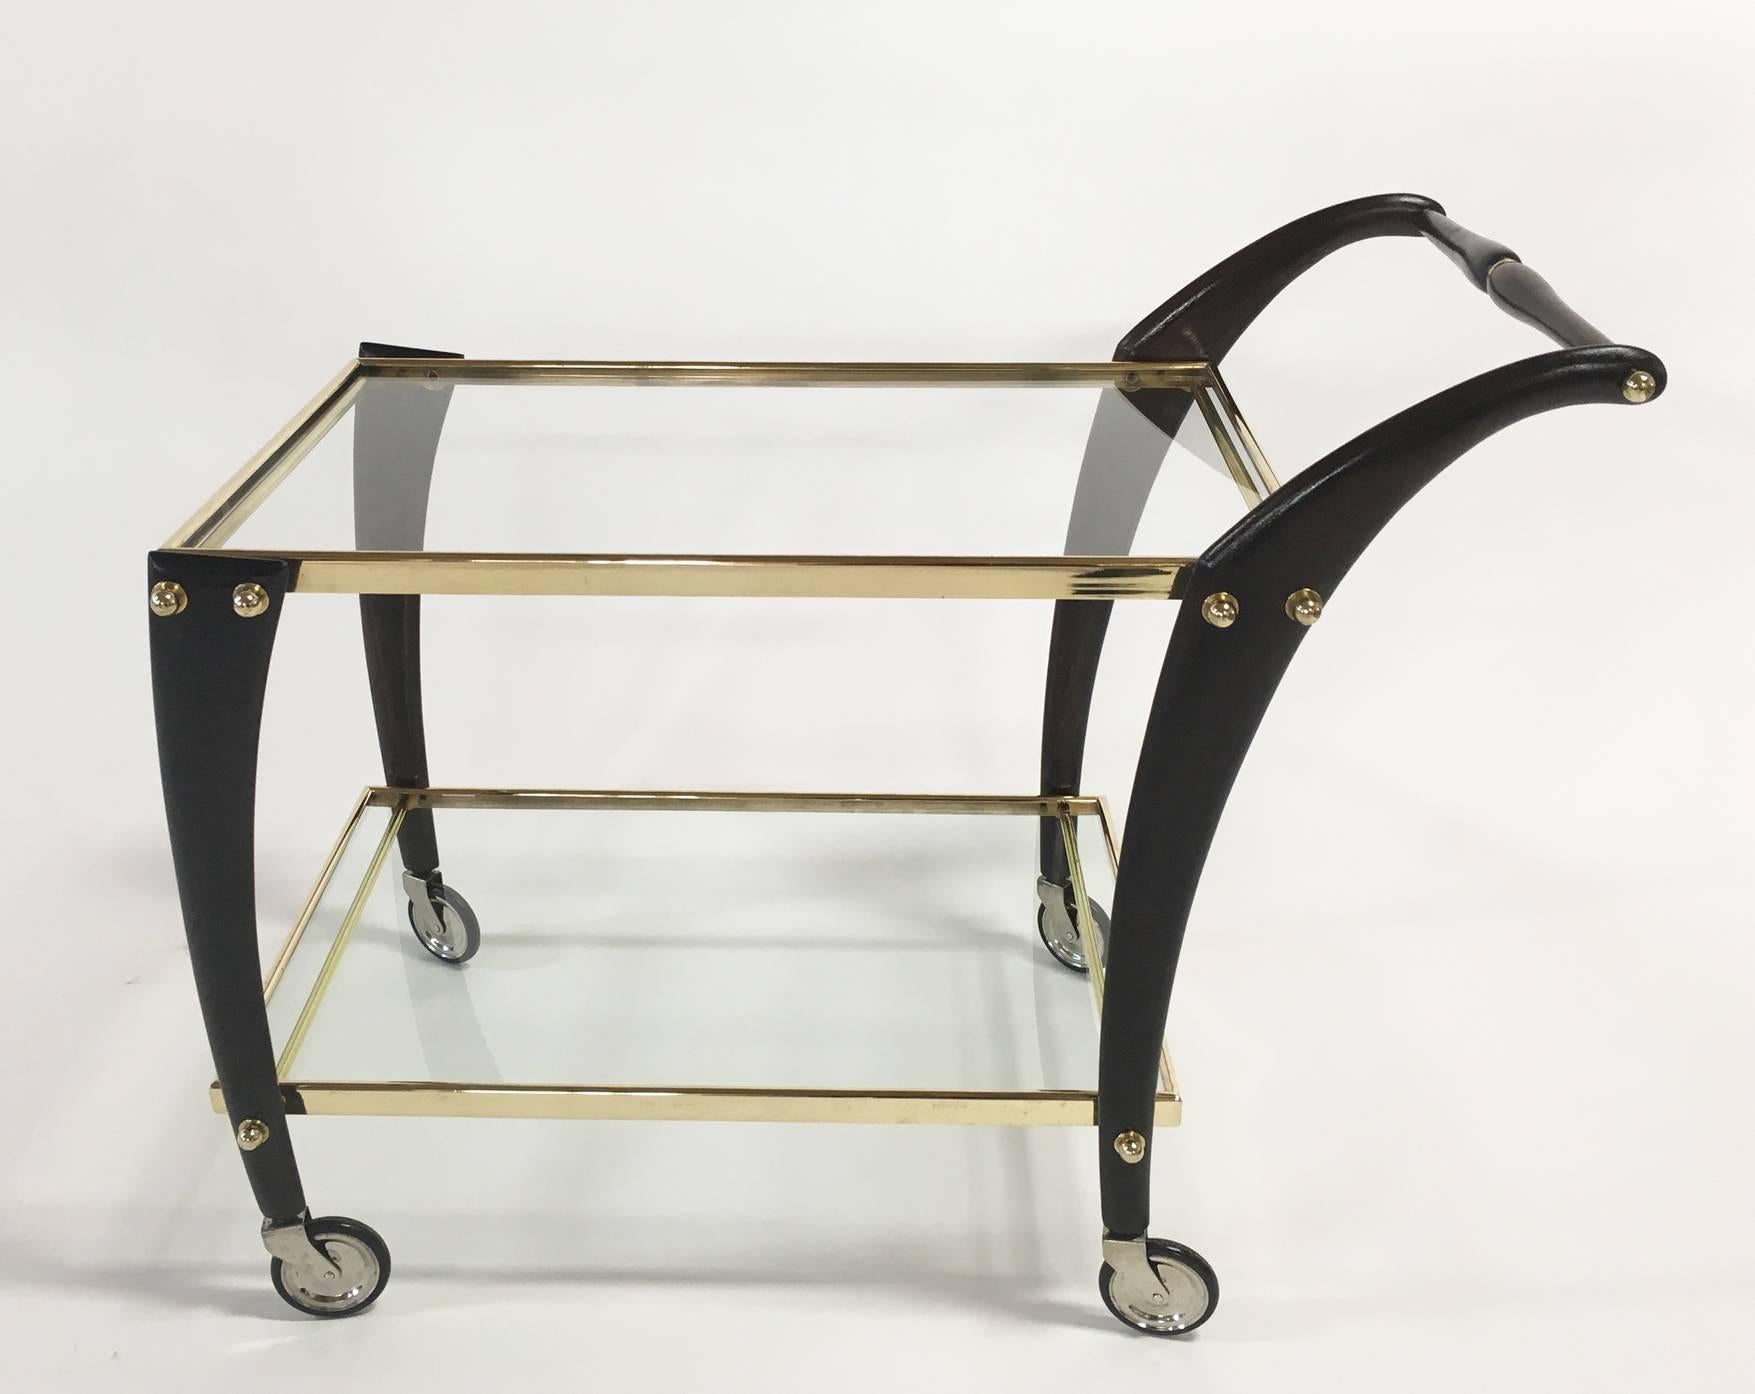 Sculptural bar cart attributed to Cesare Lacca. Two-tiered polished brass frame with clear glass shelves, framed by curvaceous ebonized mahogany posts, on four chrome and rubber swivel wheels. Height measurement with top handle: 27.5 inches.